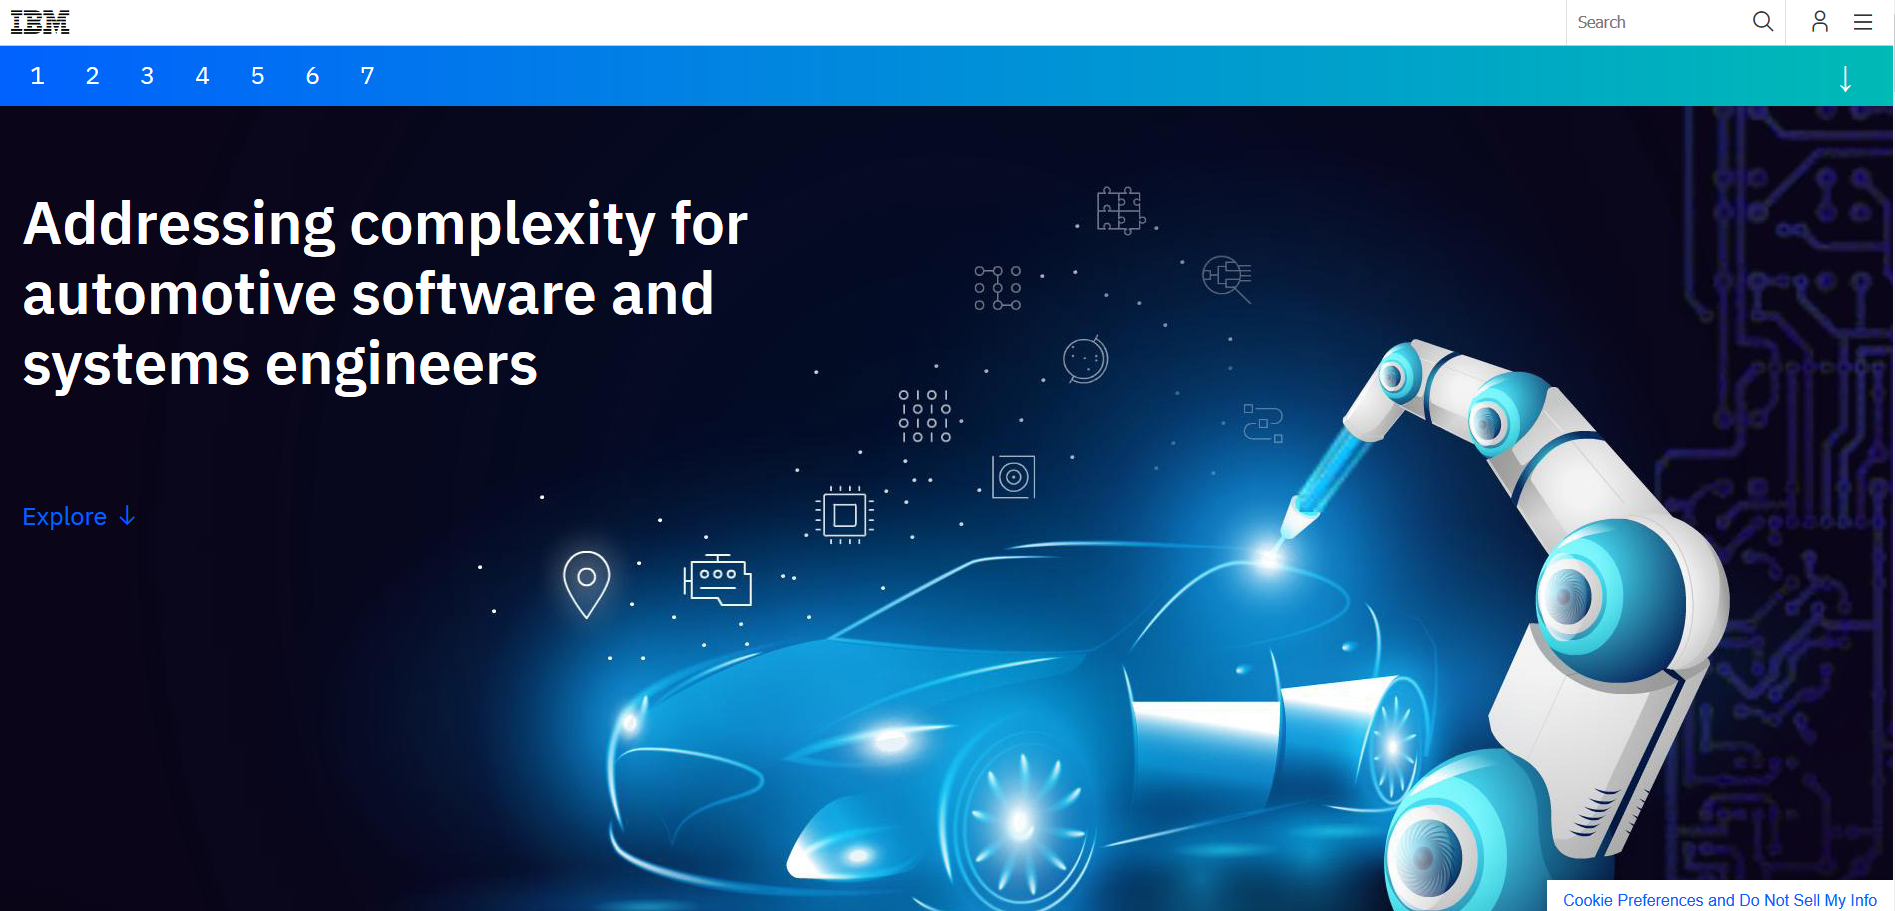 Addressing complexity for auto engineers